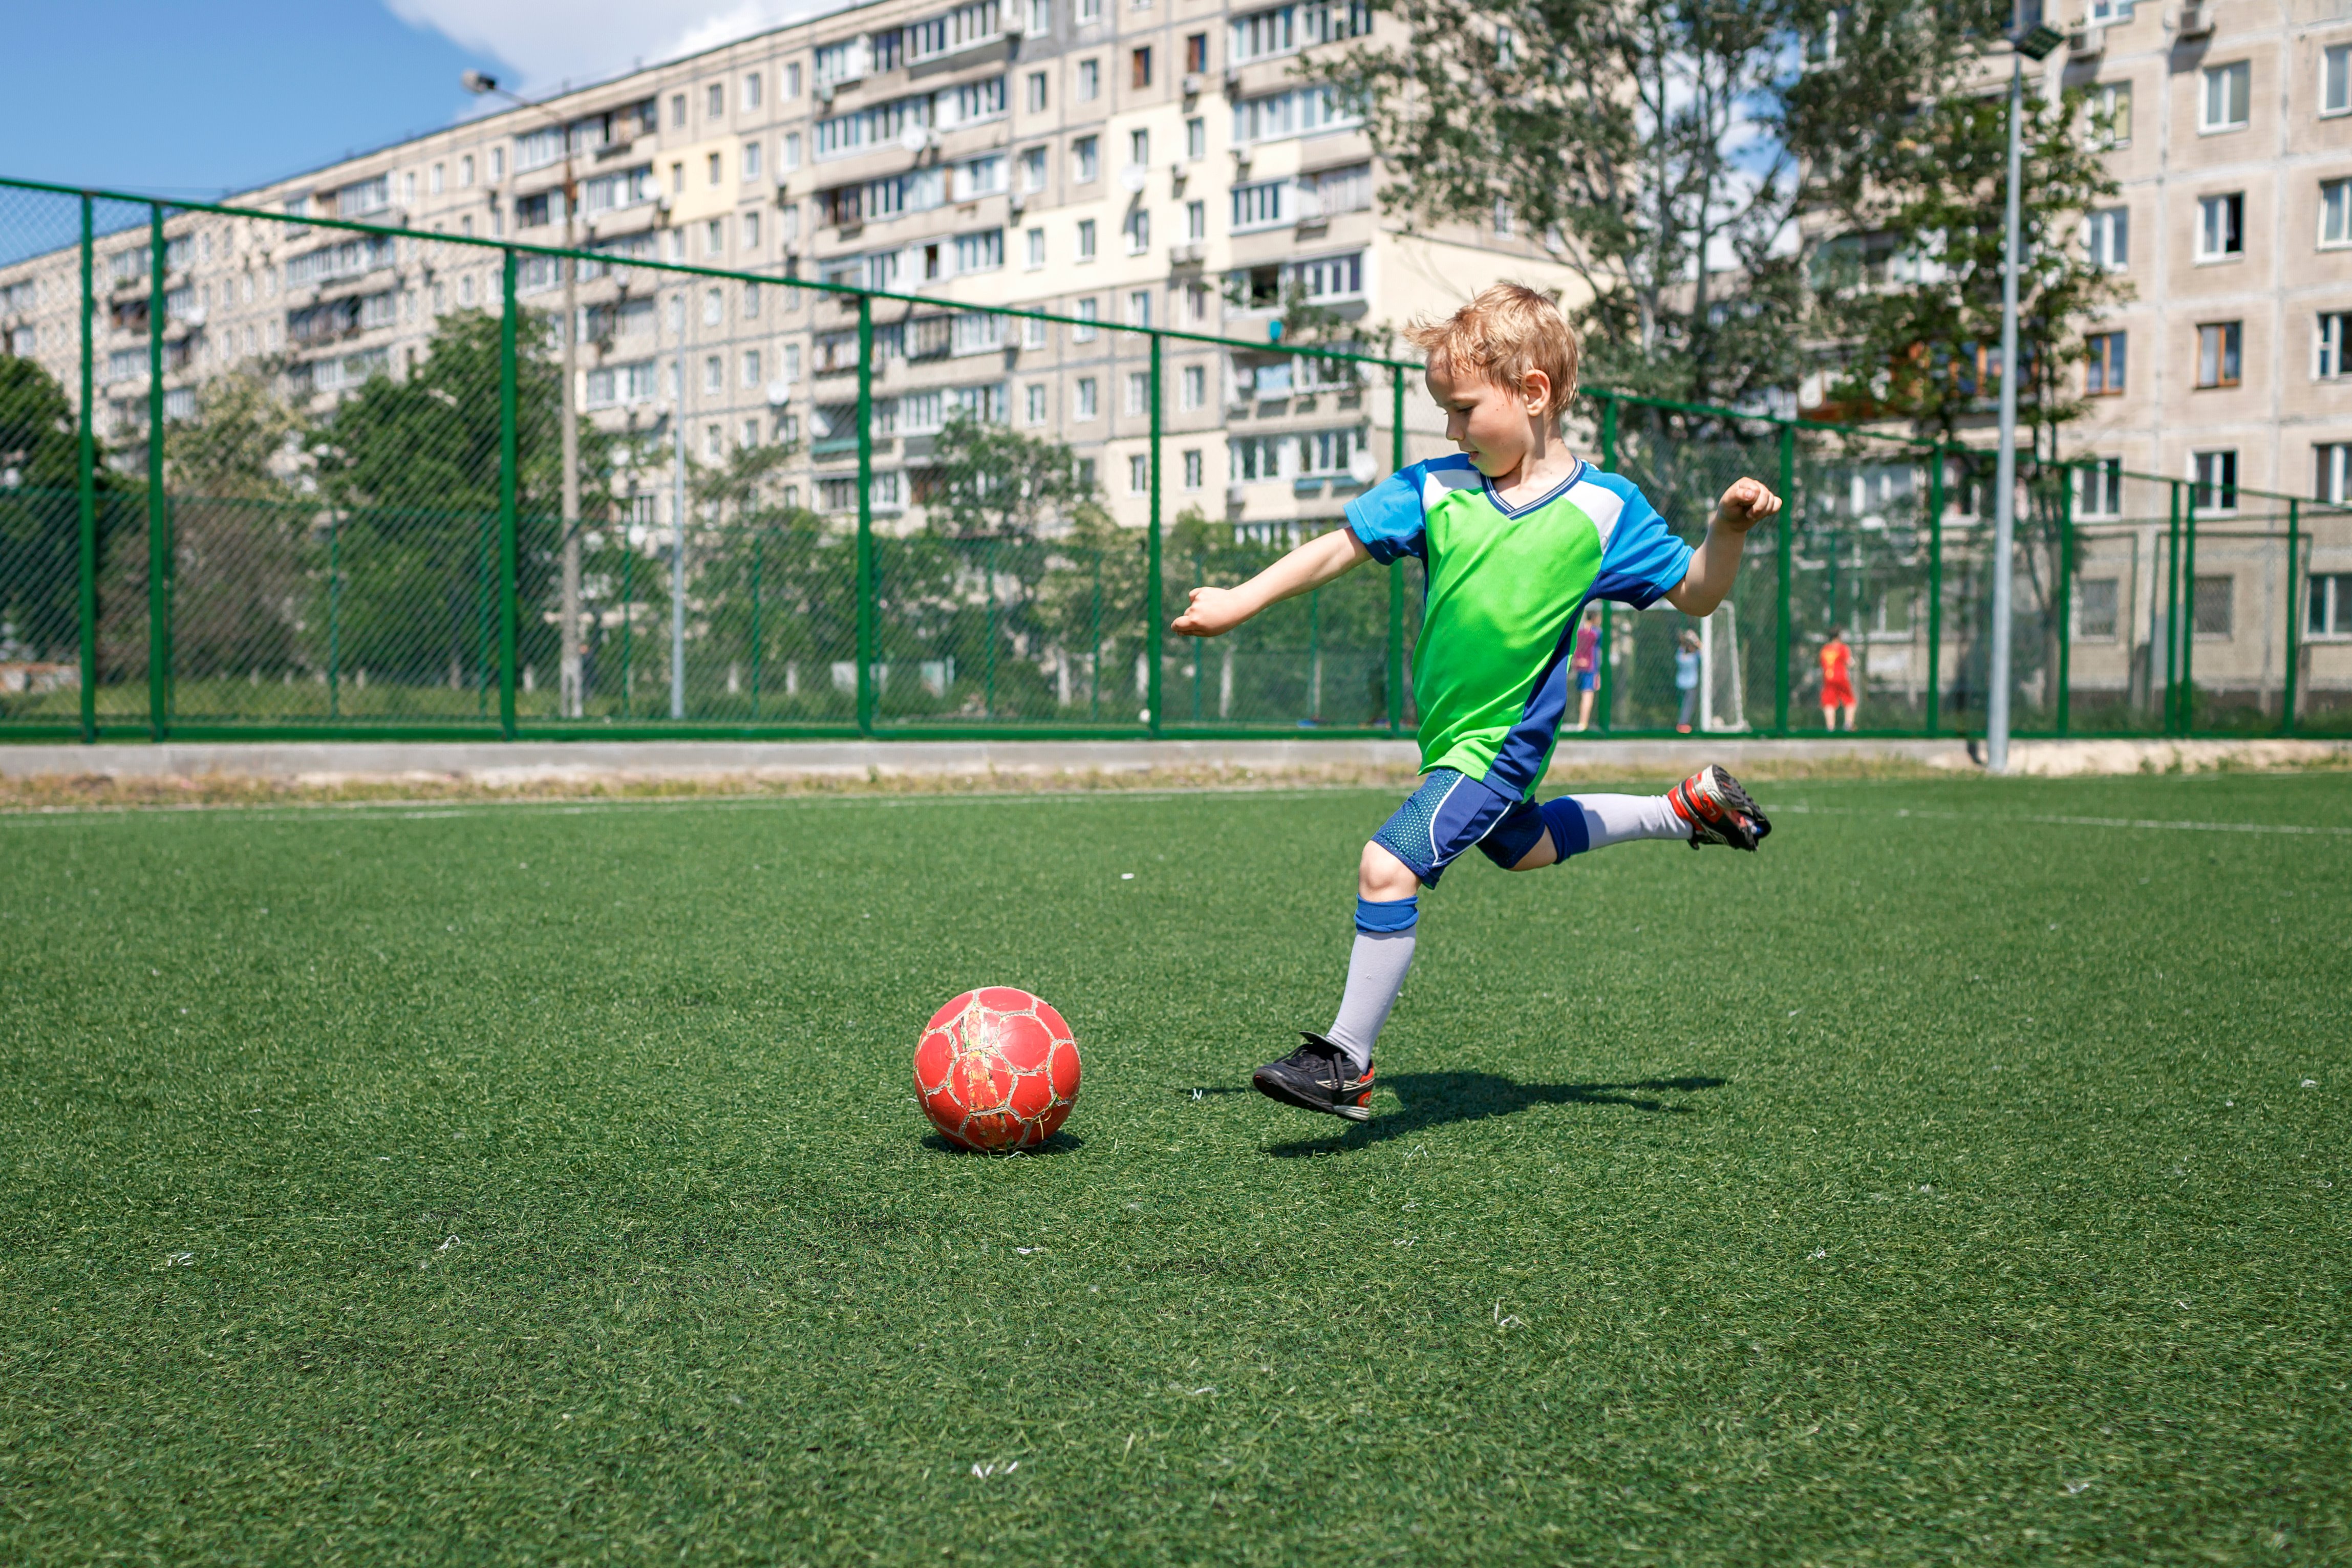 little-boy-in-blue-and-green-form-playing-football-2021-09-03-05-59-22-utc